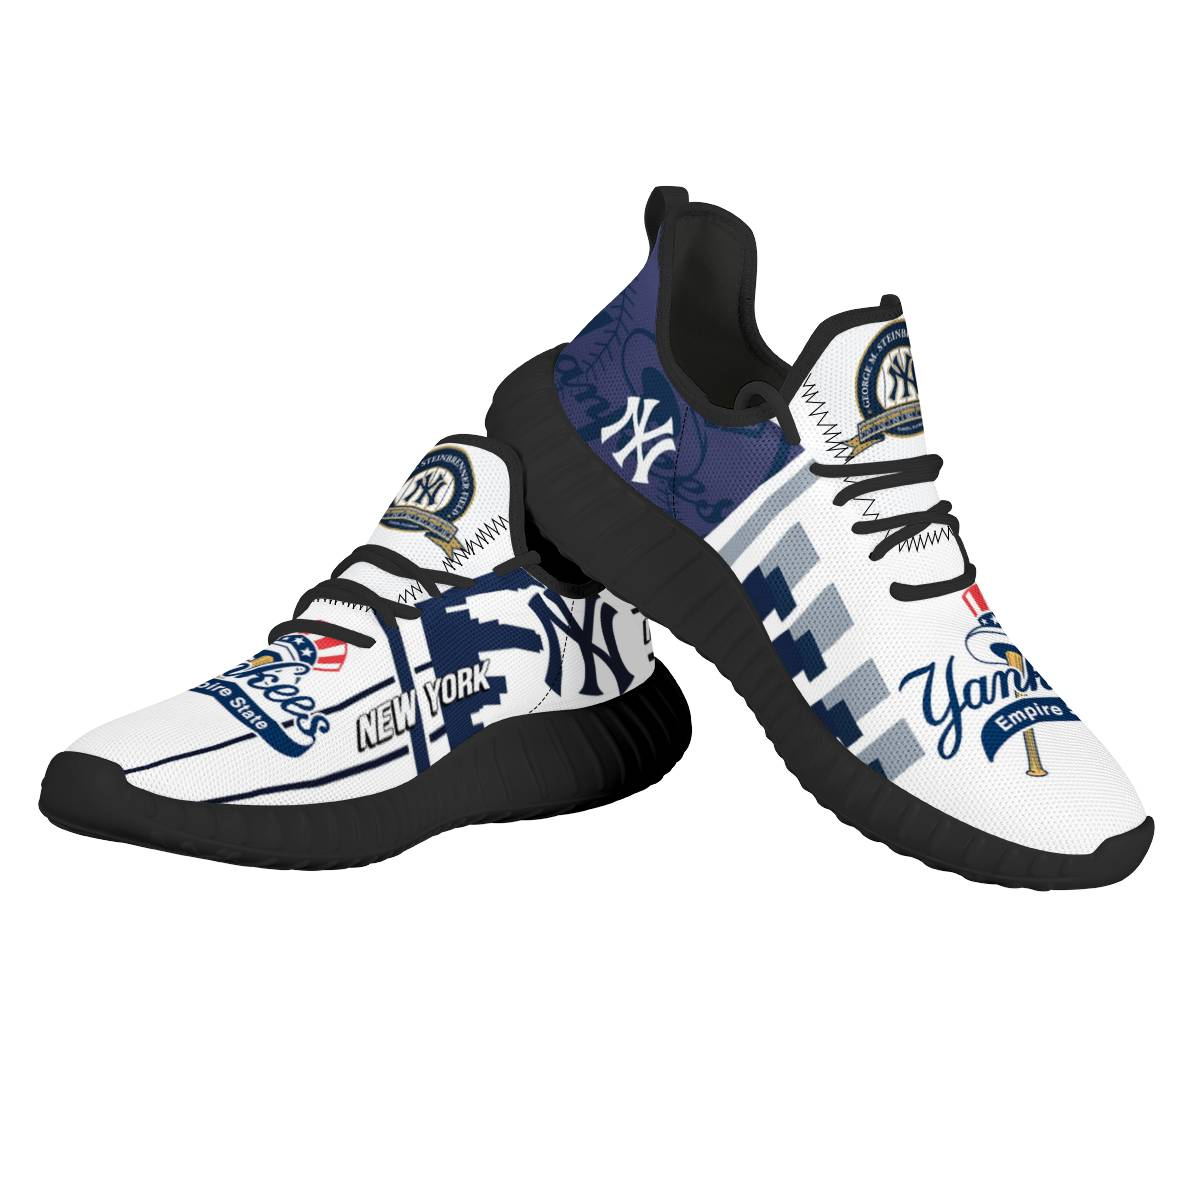 Women's New York Yankees Mesh Knit Sneakers/Shoes 003